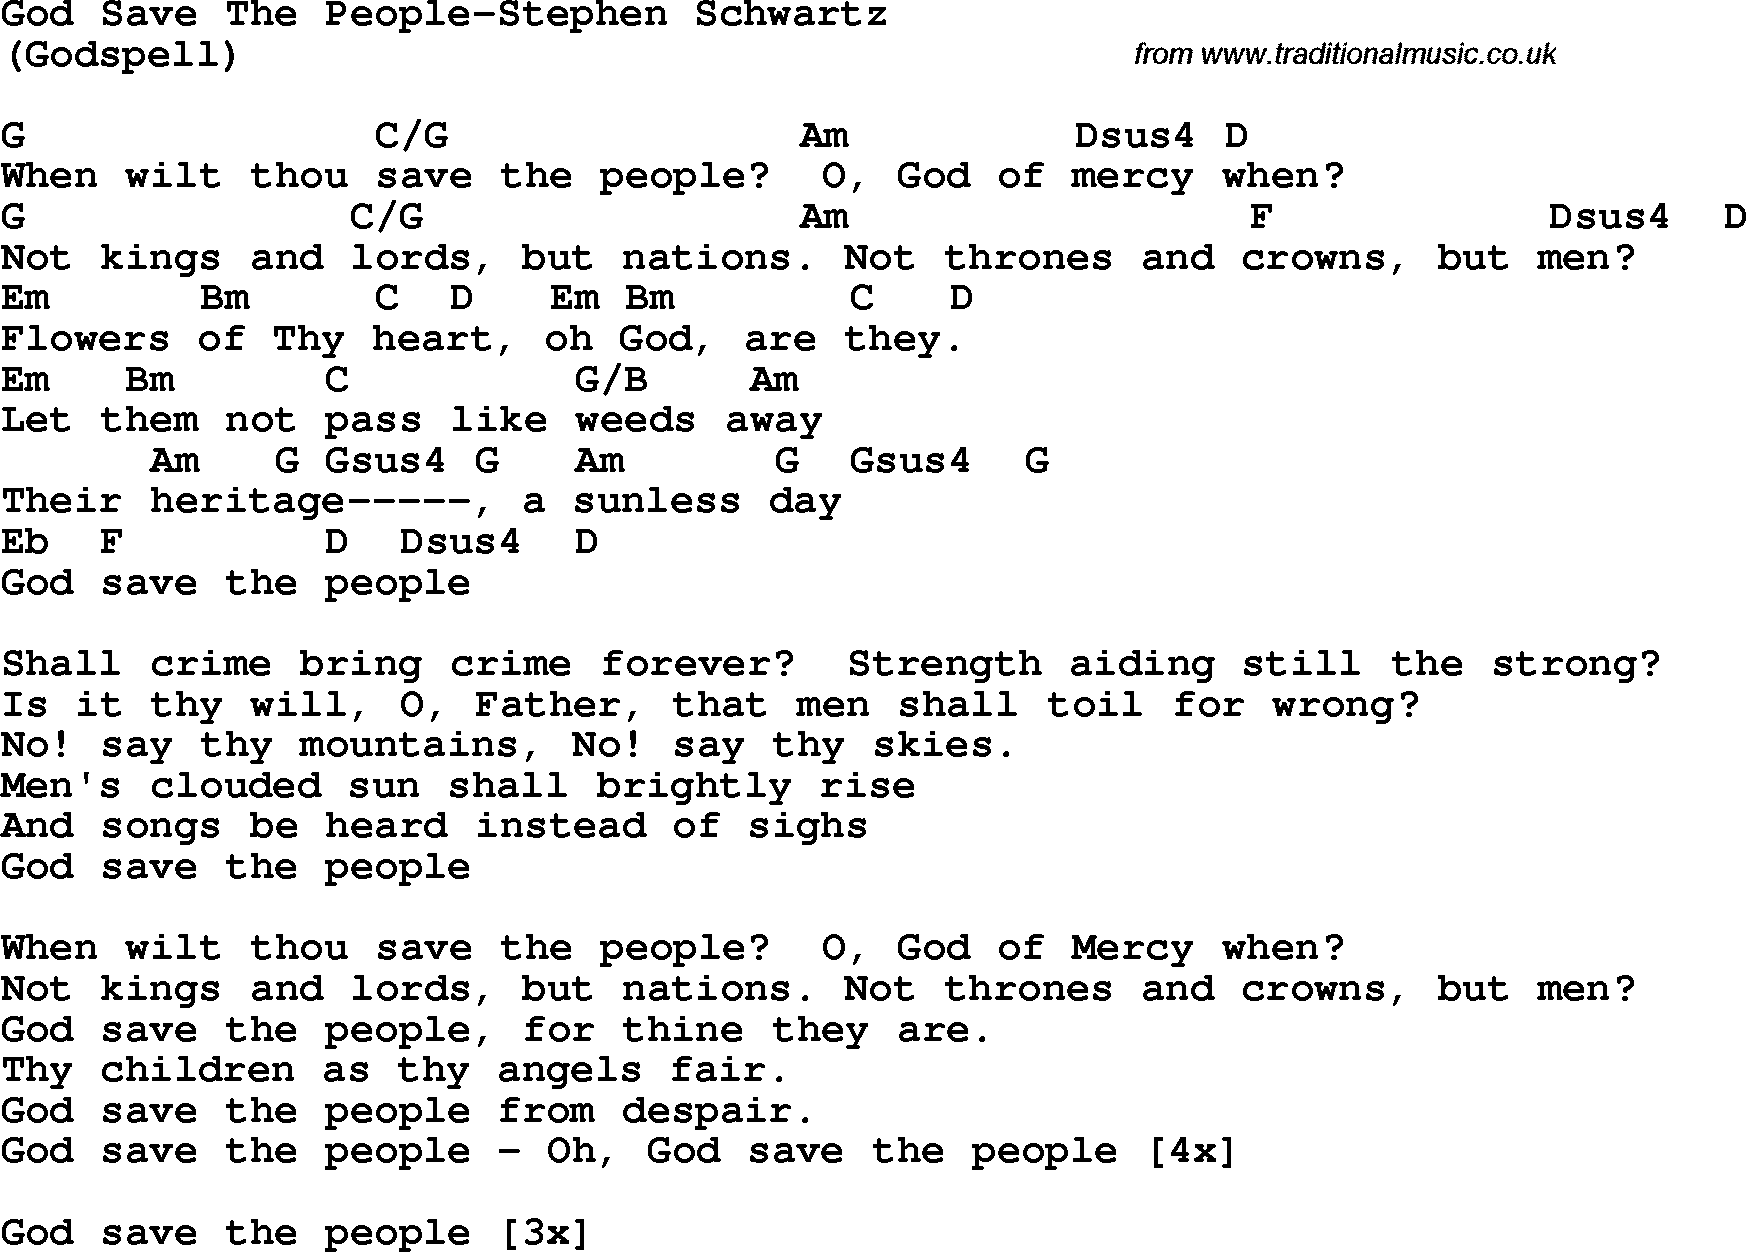 Protest Song God Save The People-Stephen Schwartz lyrics and chords